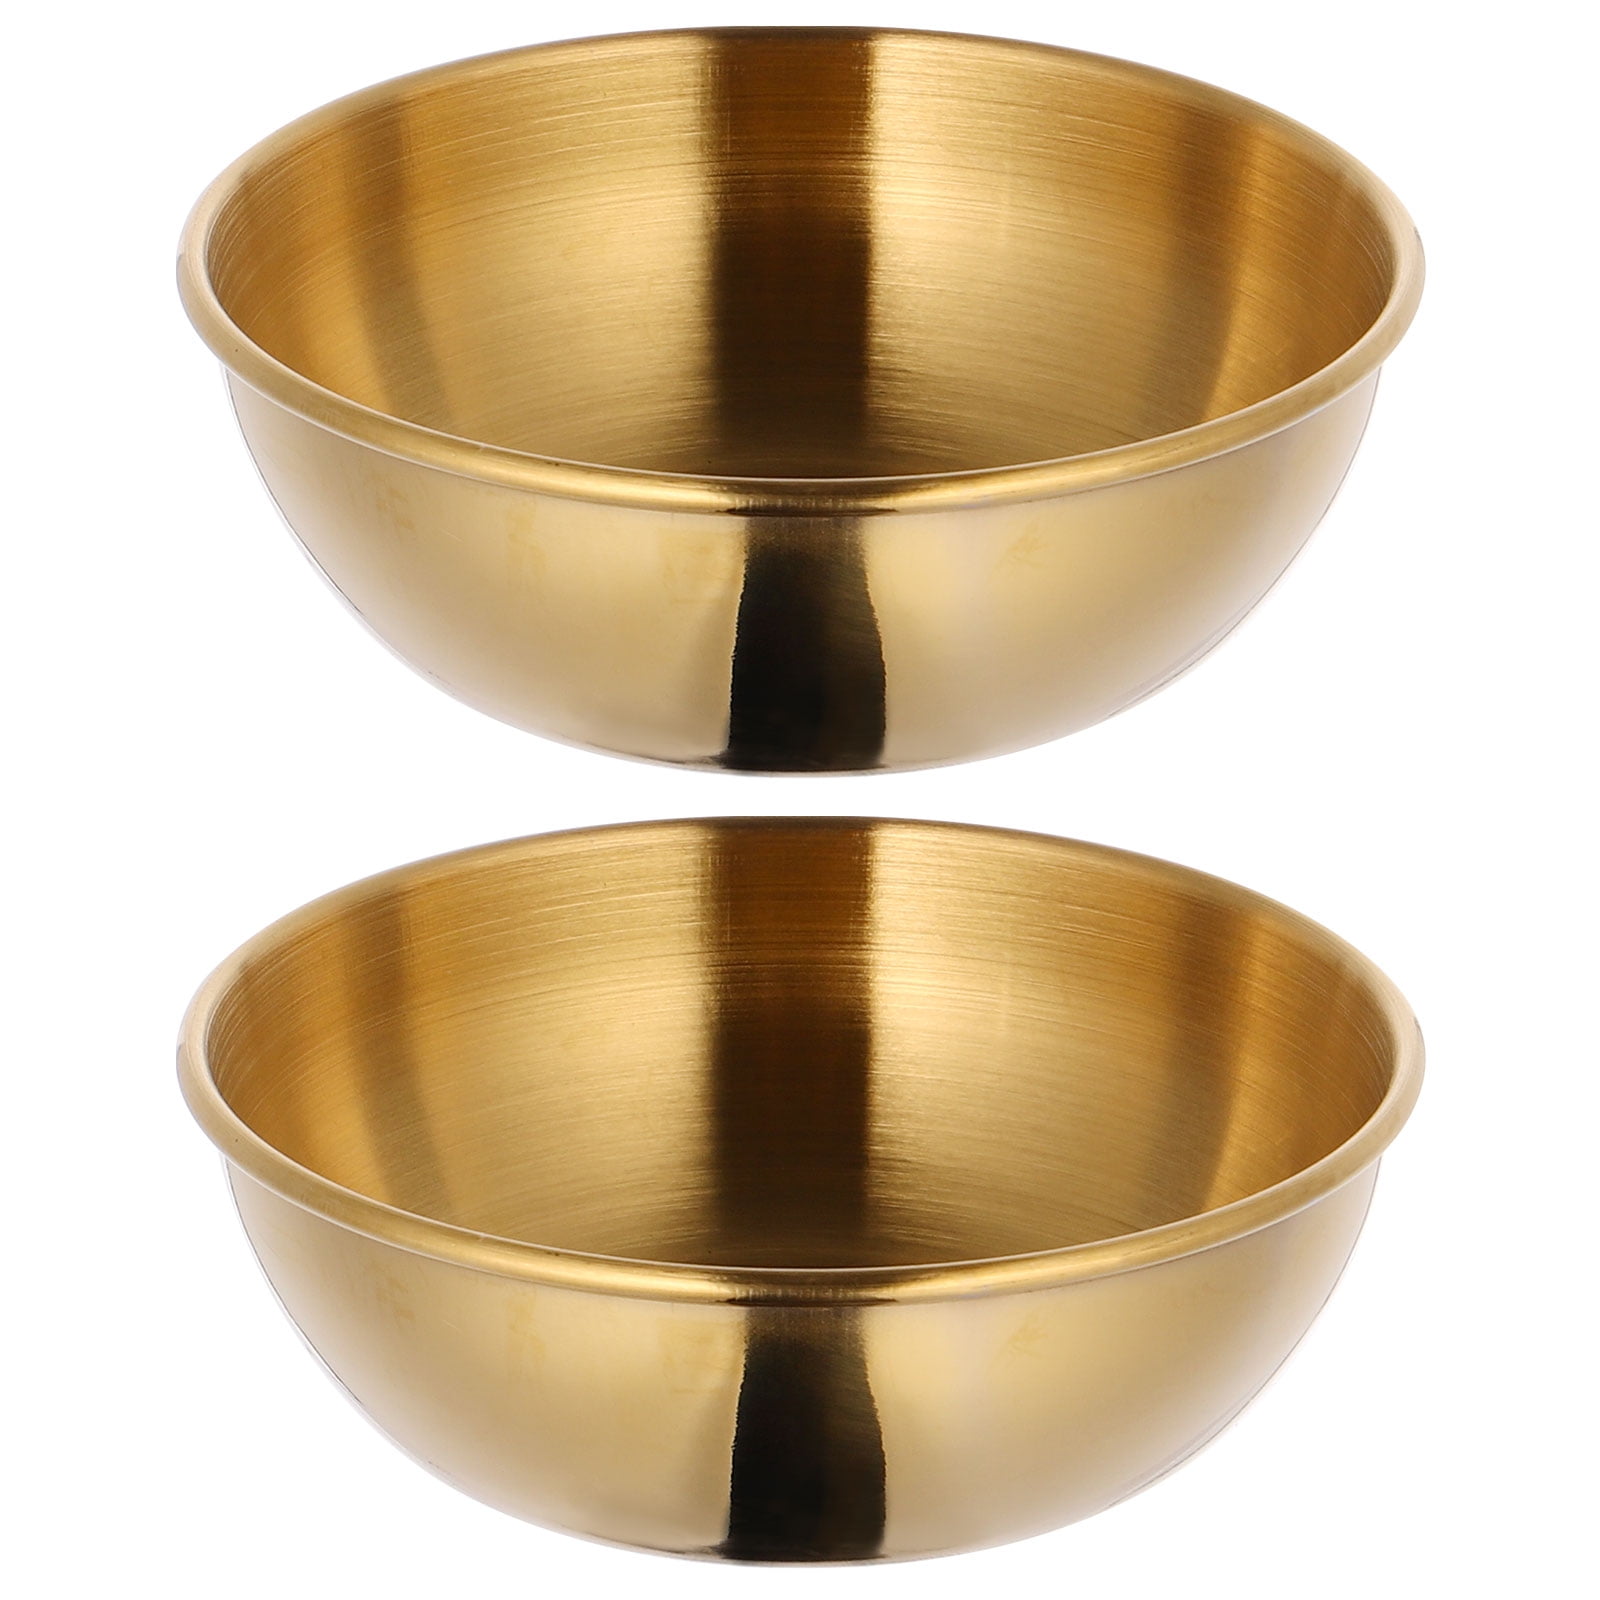 2pcs Stainless Steel Appetizer Serving Tray Sauce Dish Miniature Spice Dips Bowl 